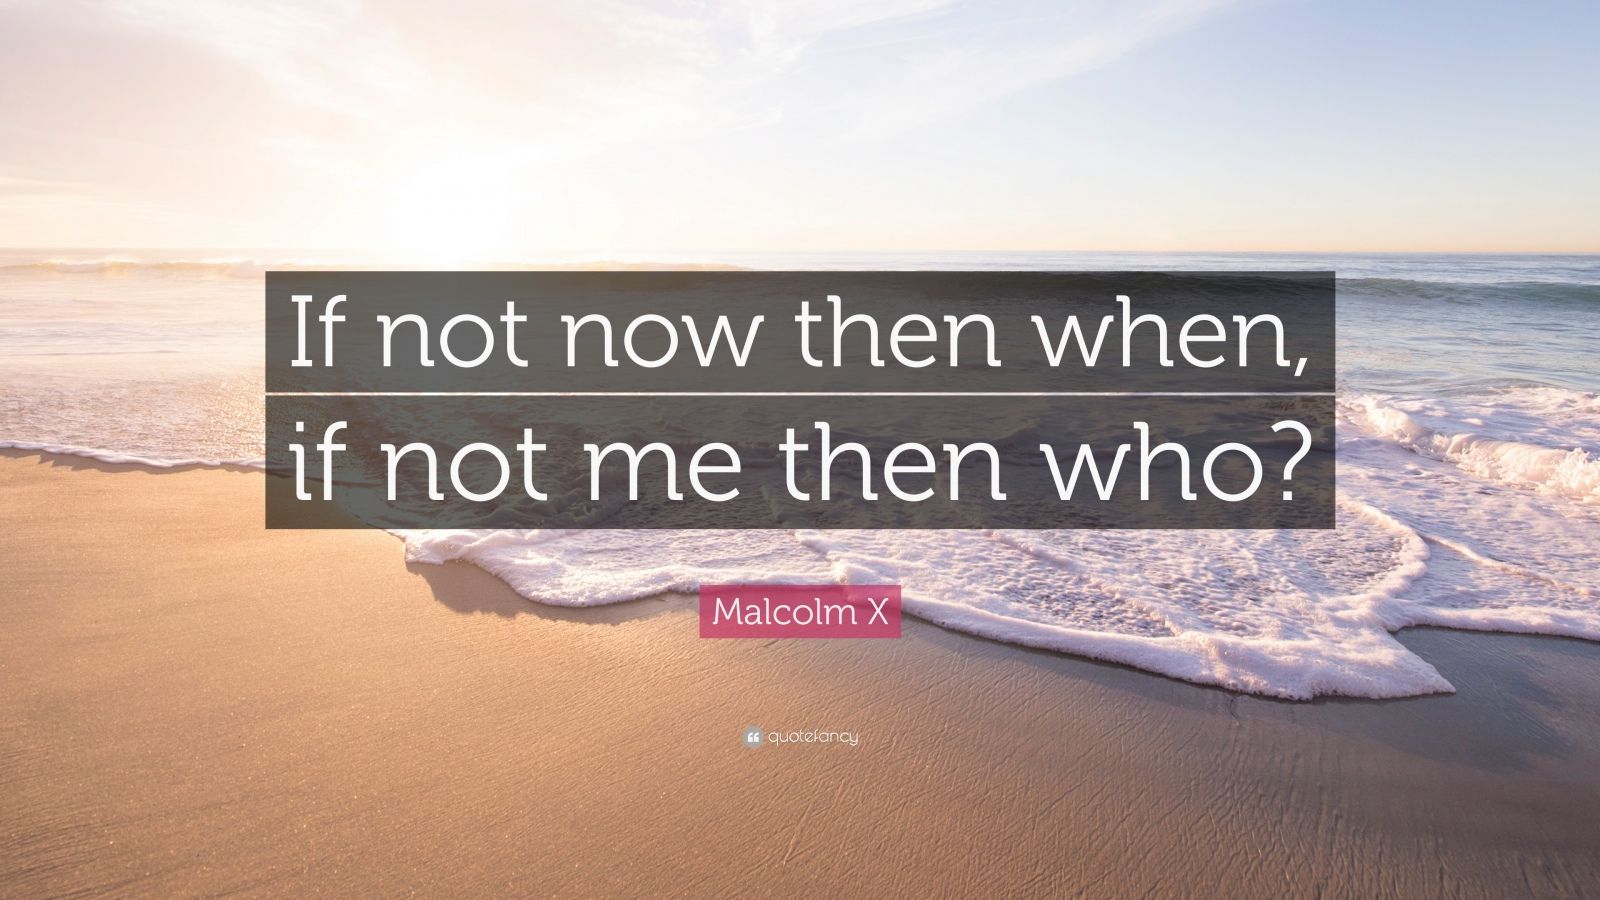 Malcolm X Quote “If not now then when, if not me then who